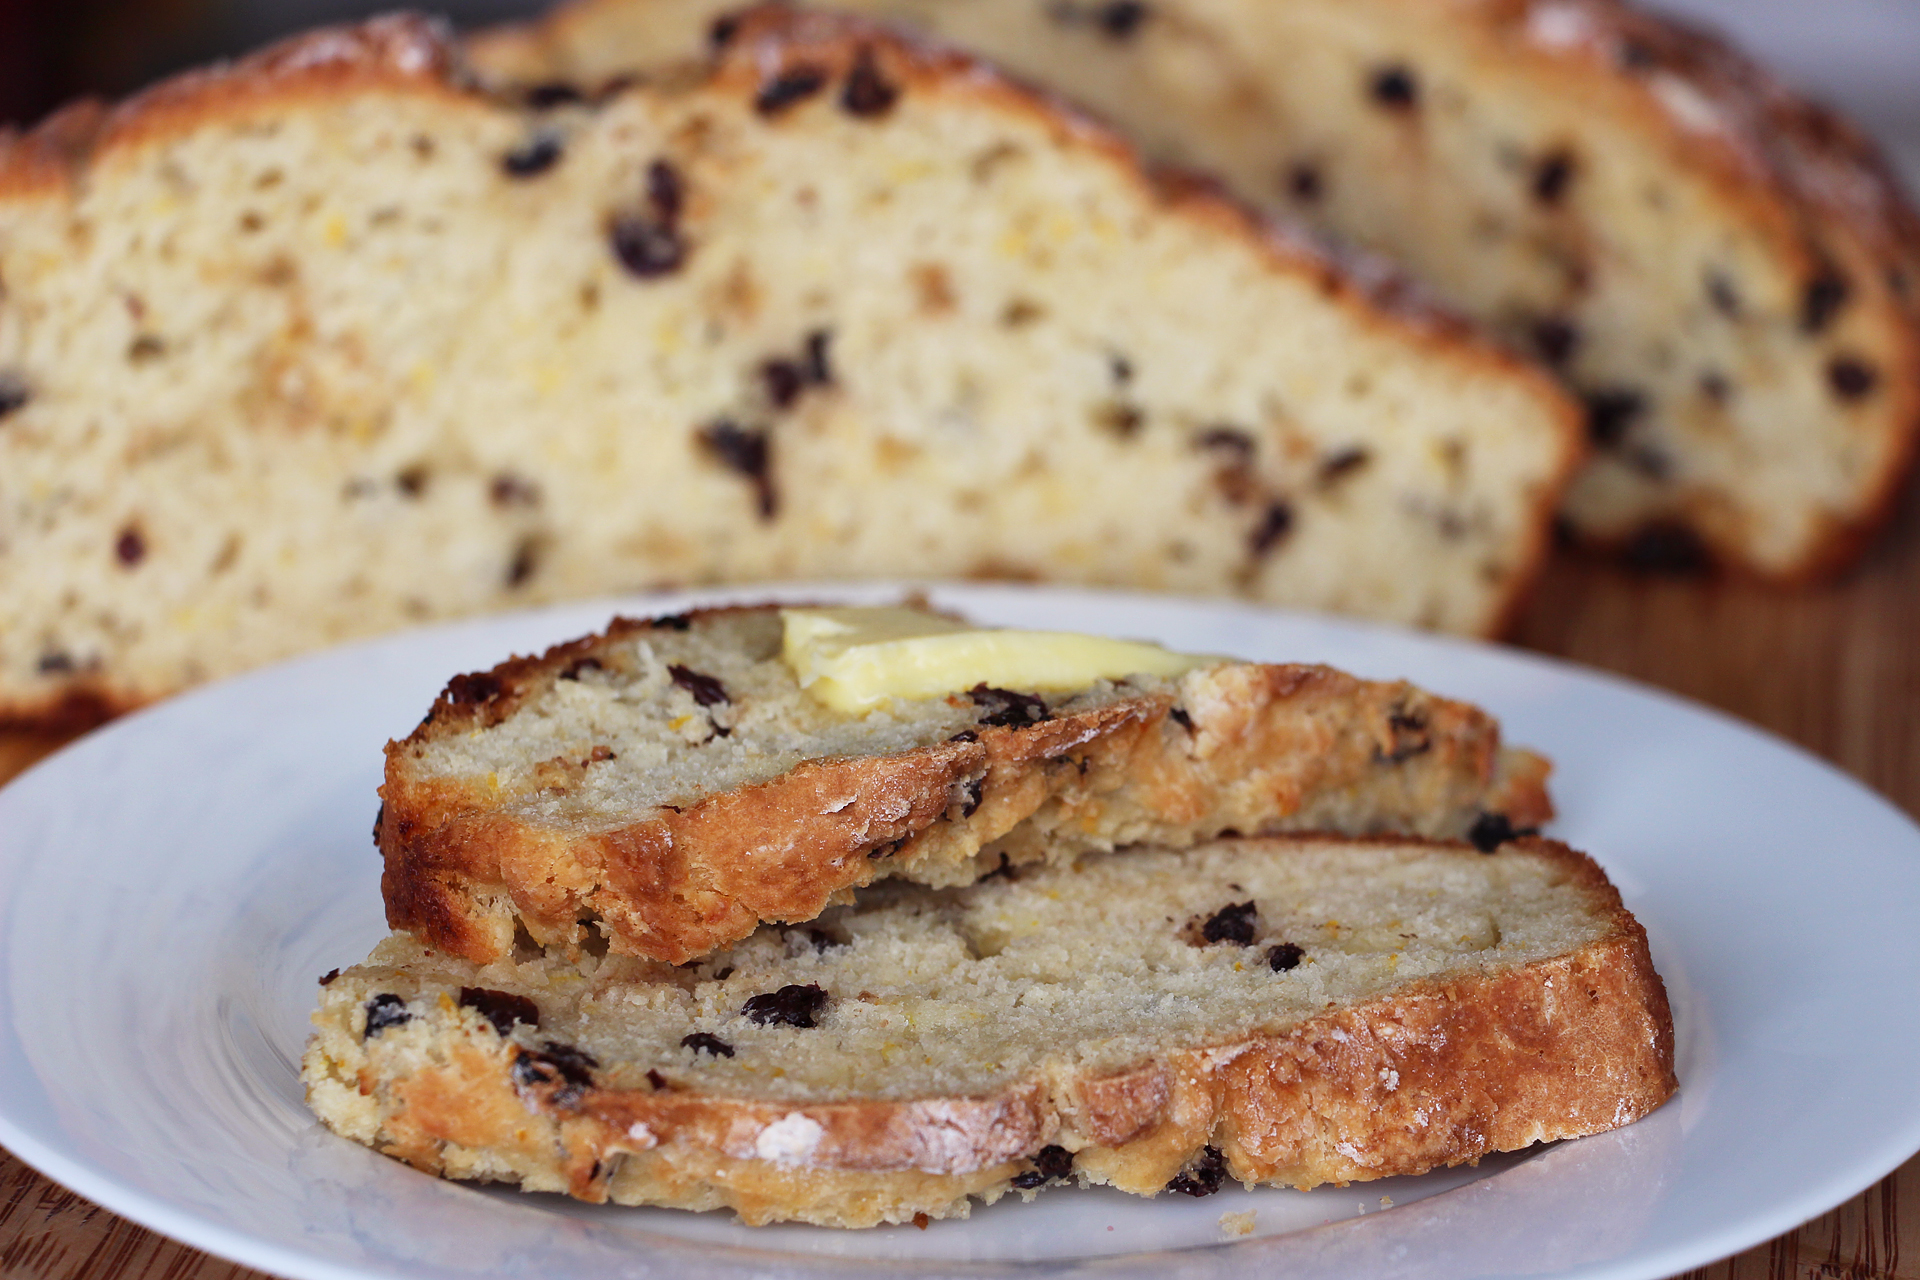 Sliced and buttered Irish-American Soda Bread with Currants and Orange Zest. Photo: Wendy Goodfriend